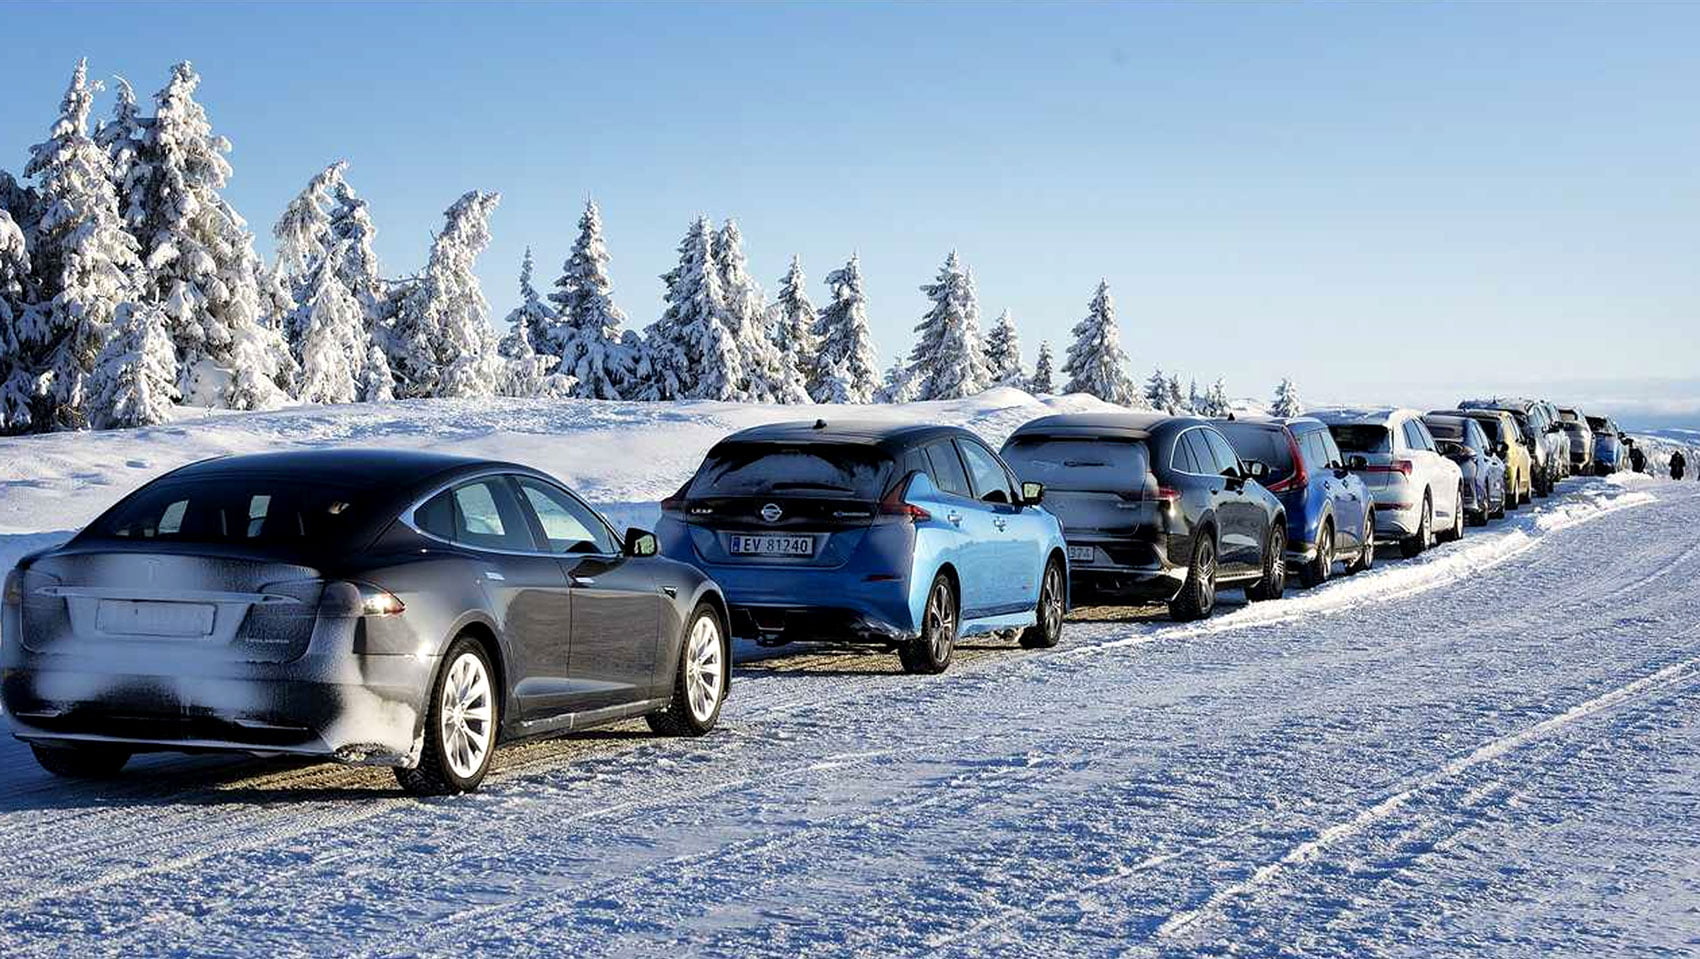 Electronic-Vehicles-On-The-Road-During-Winter